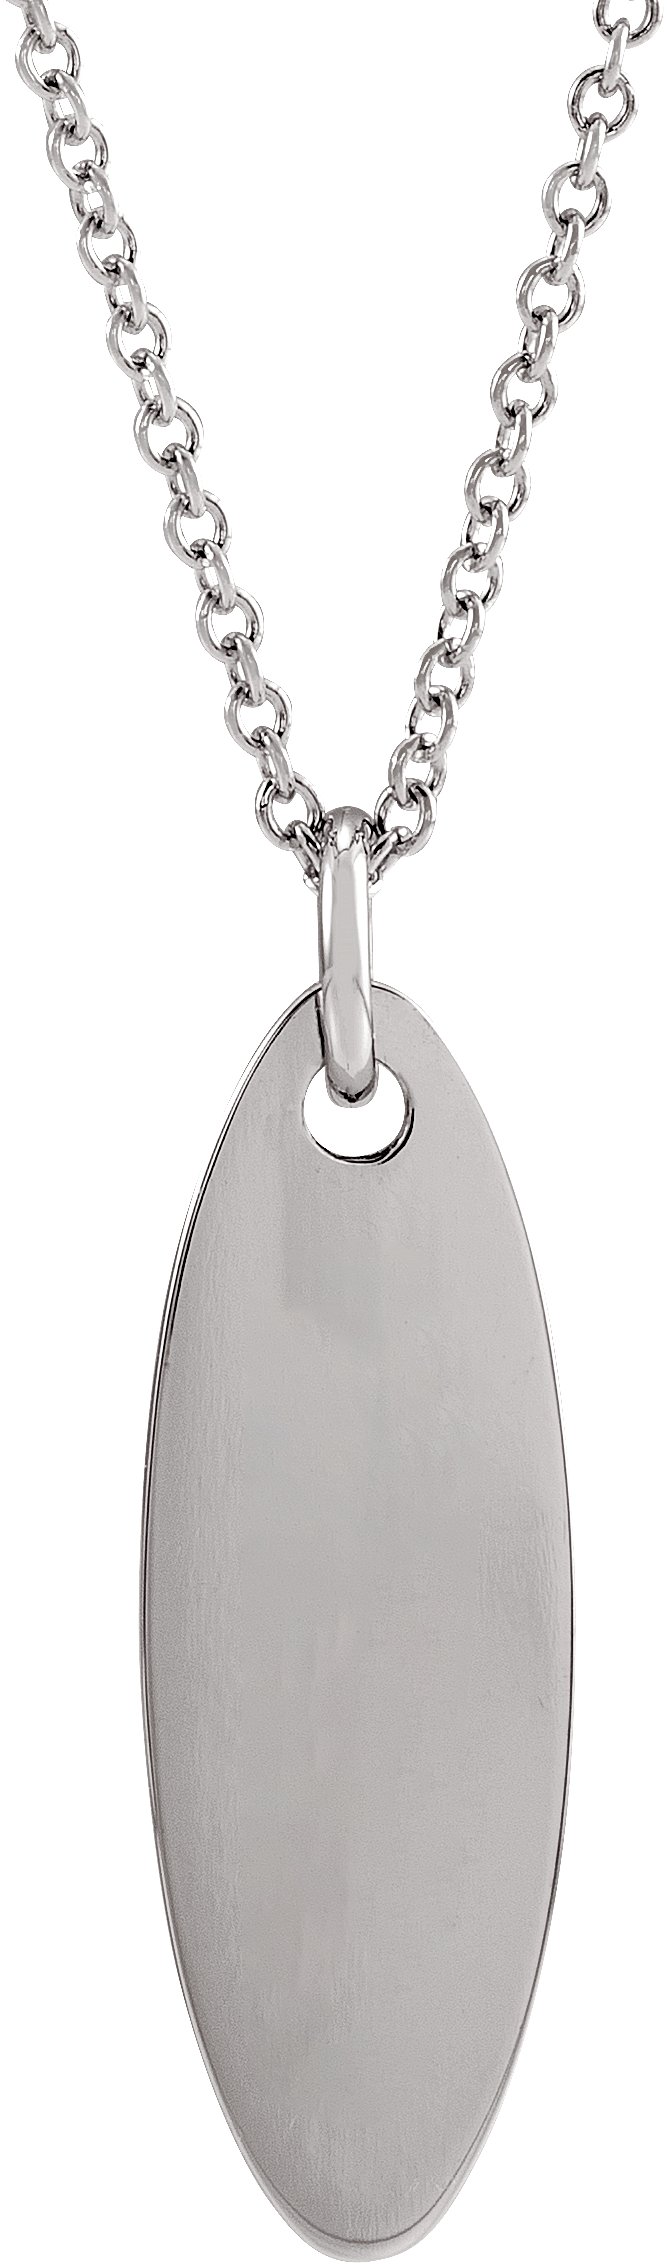 Sterling Silver 22.9x7 mm Elongated Oval 16-18" Necklace 